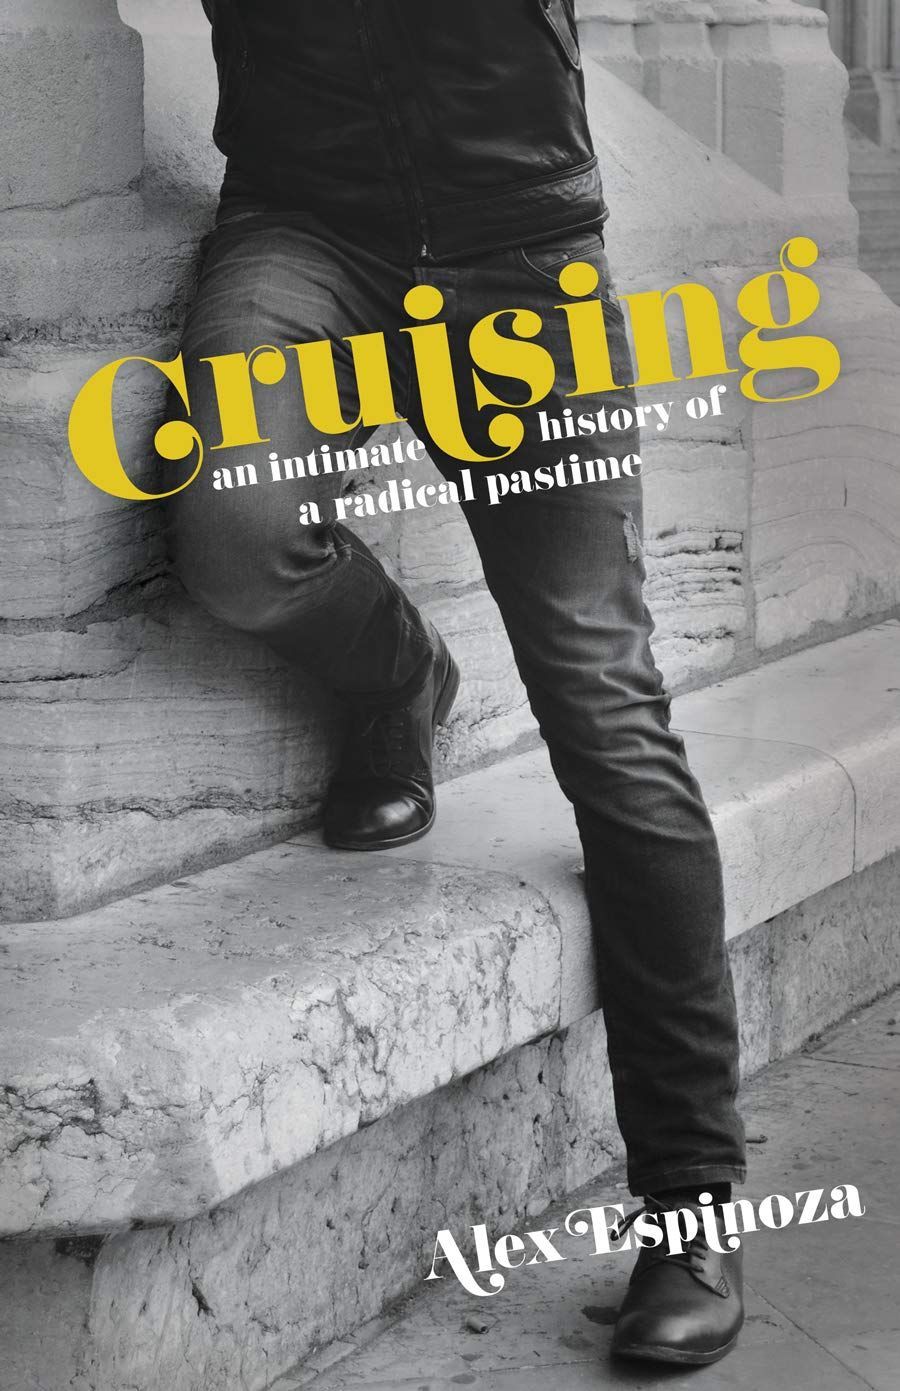 Cruising for Sex, Cruising the Political: Alex Espinoza’s “Cruising: An Intimate History of a Radical Pastime”